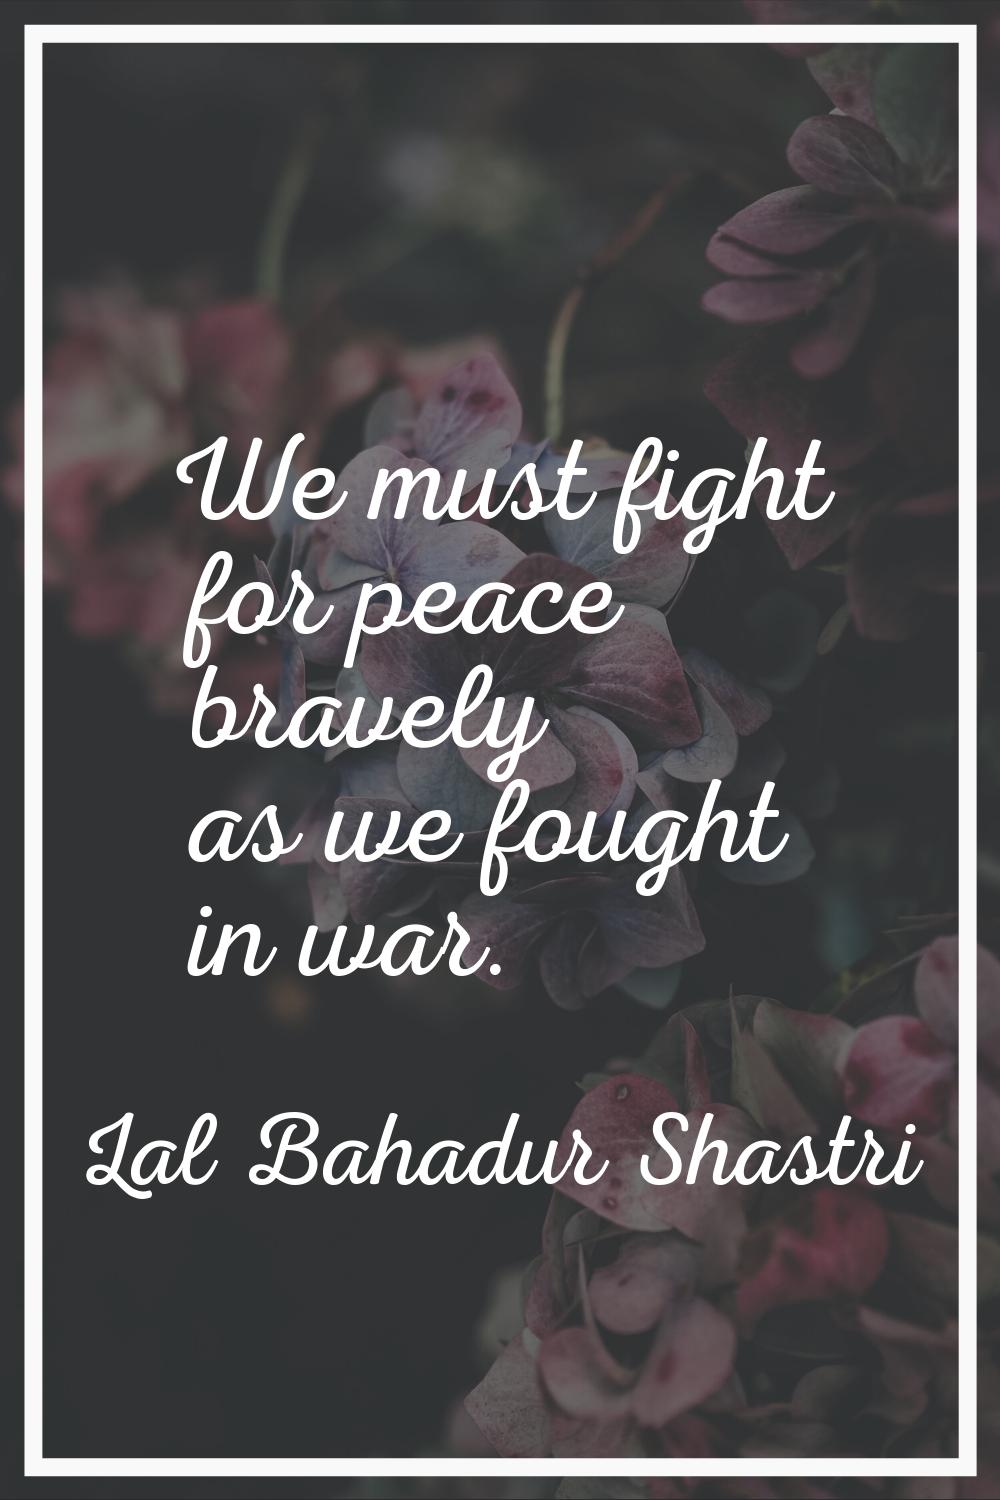 We must fight for peace bravely as we fought in war.